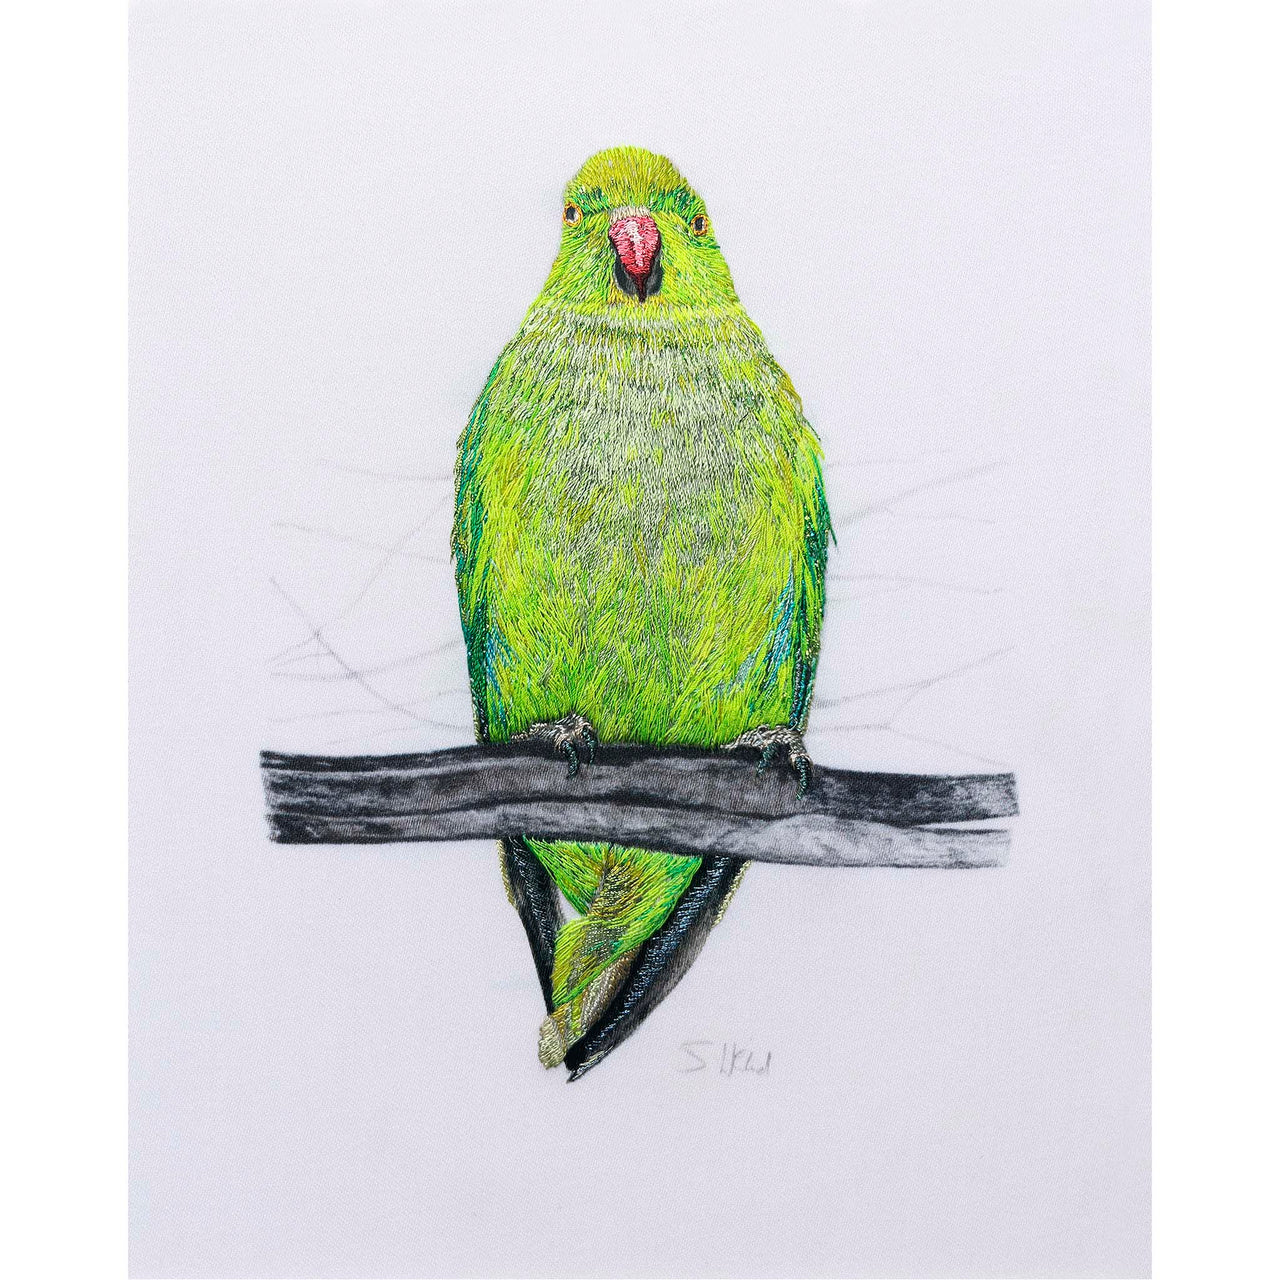 Pencil drawn and hand embroidered Parakeet artwork 